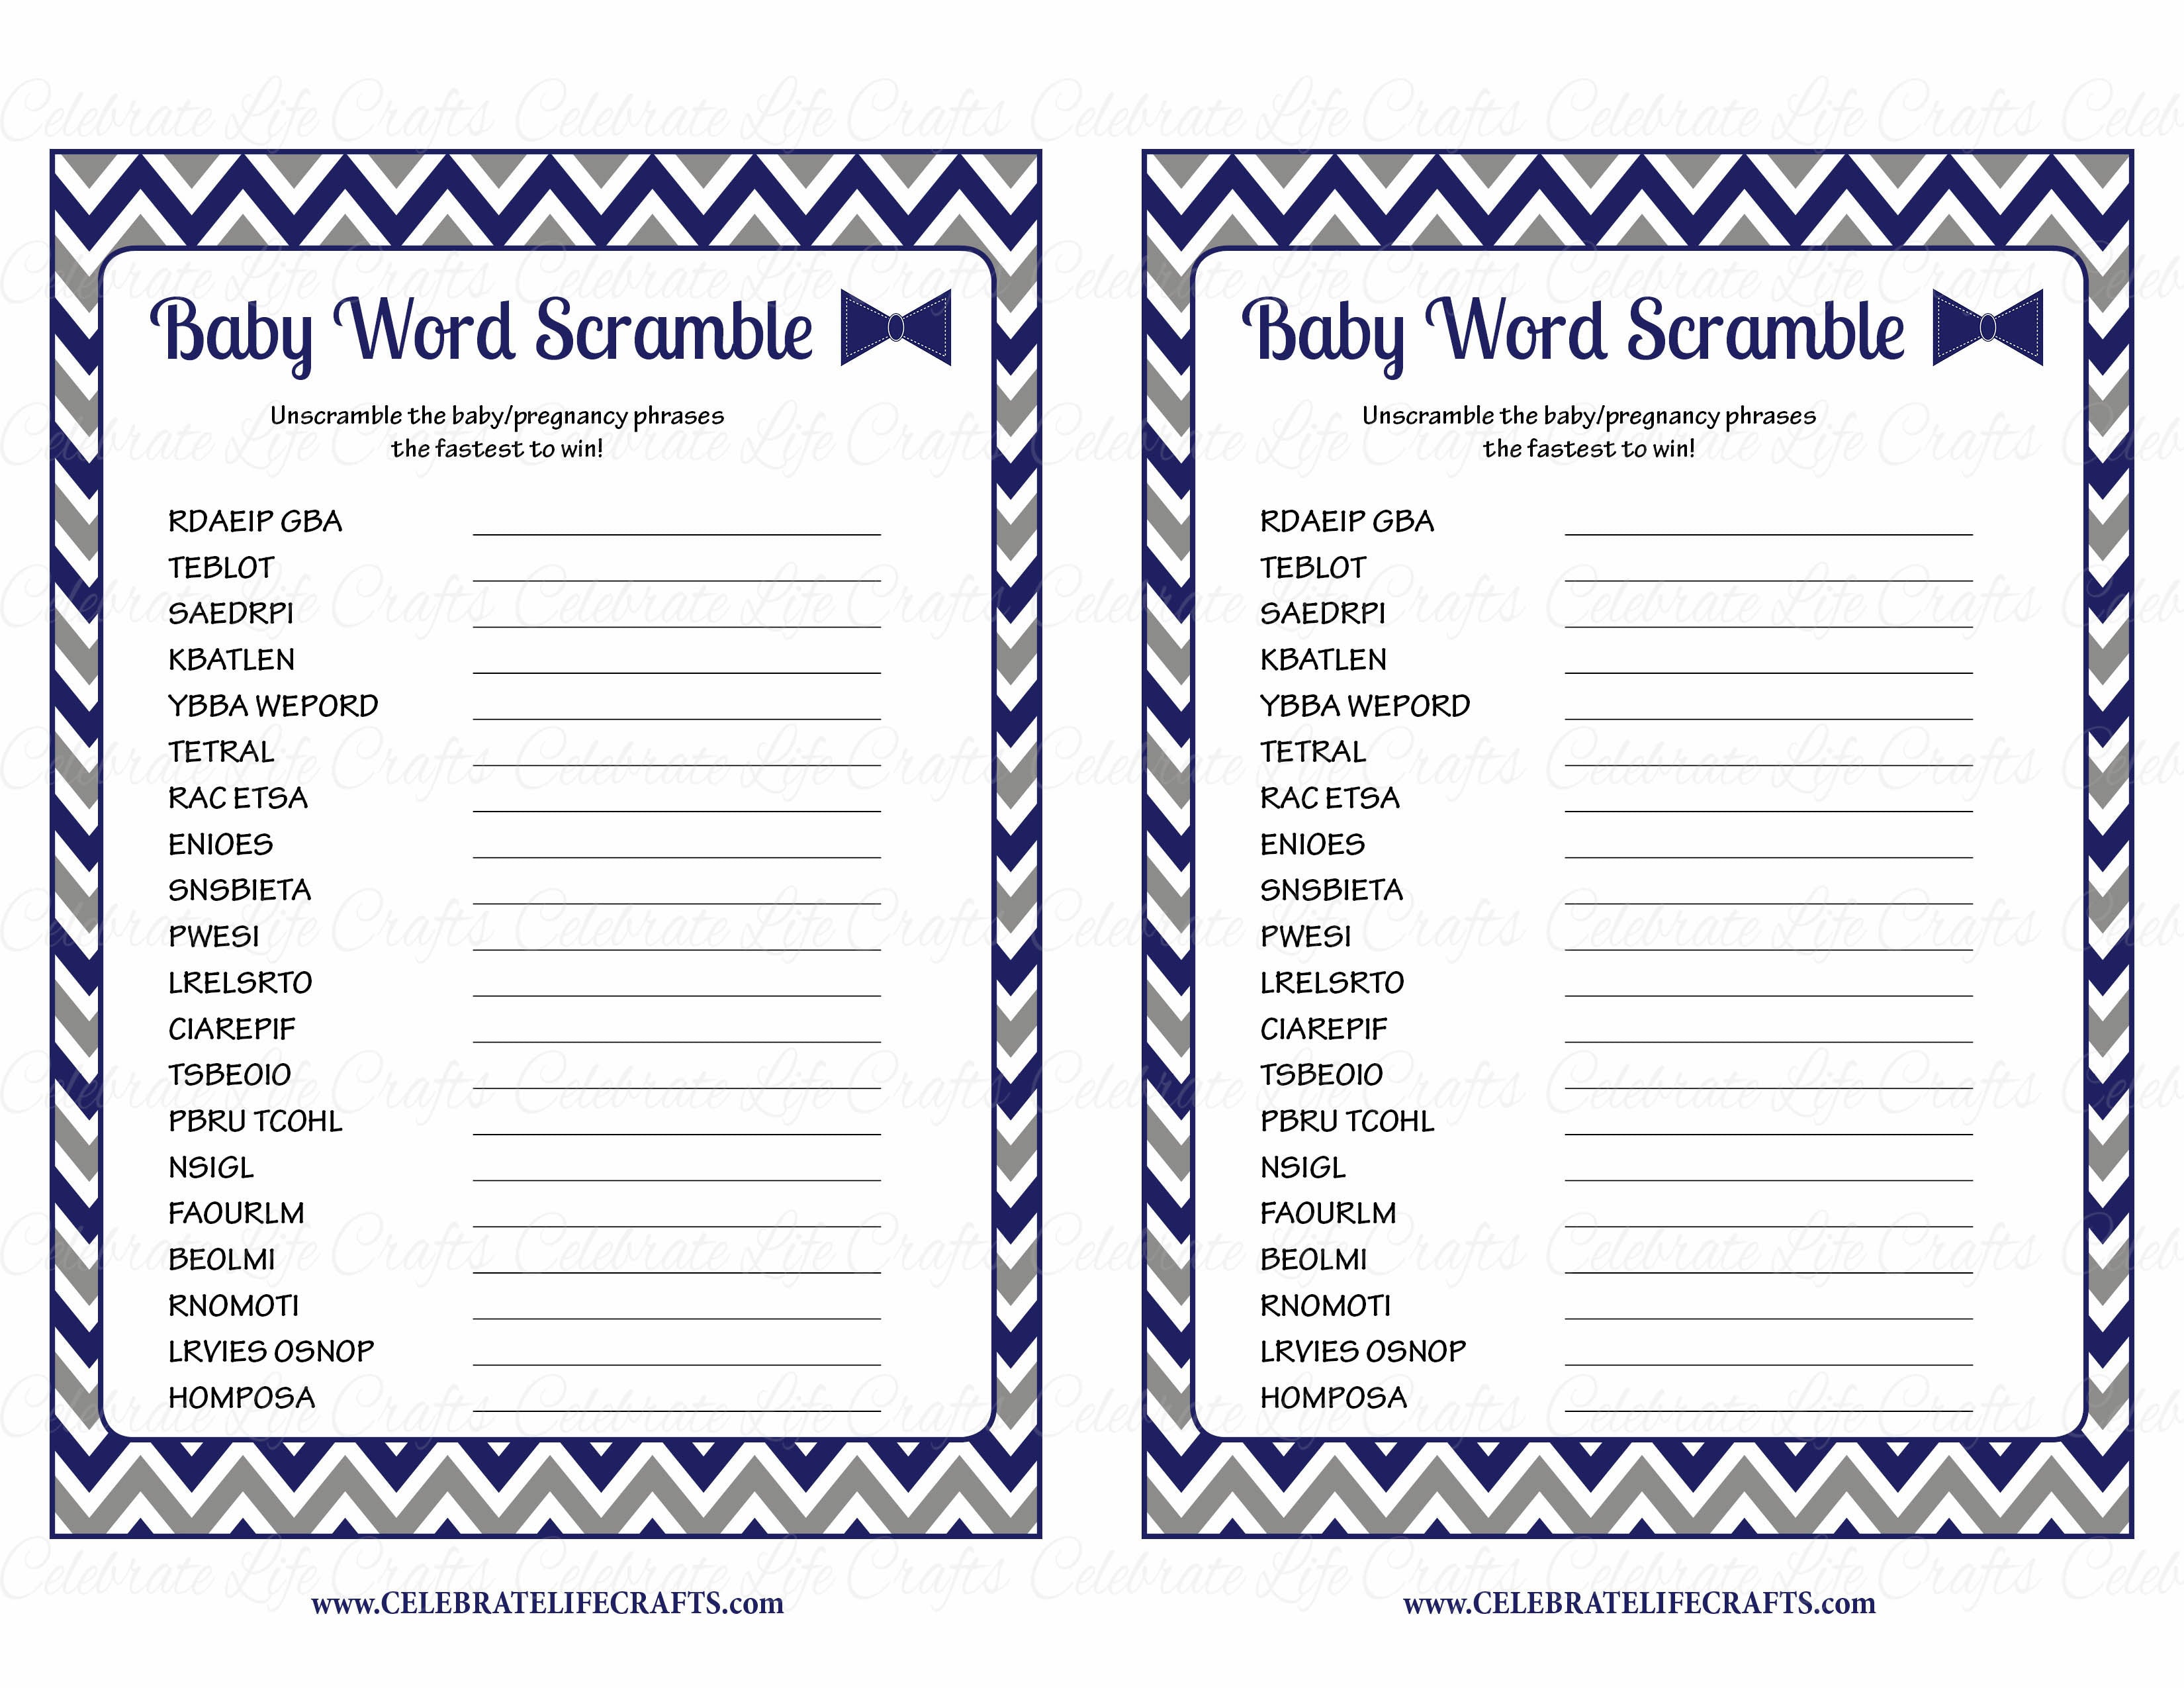 Word Scramble Baby Shower Game - Little Man Baby Shower Theme for Baby Boy - Navy Gray ...